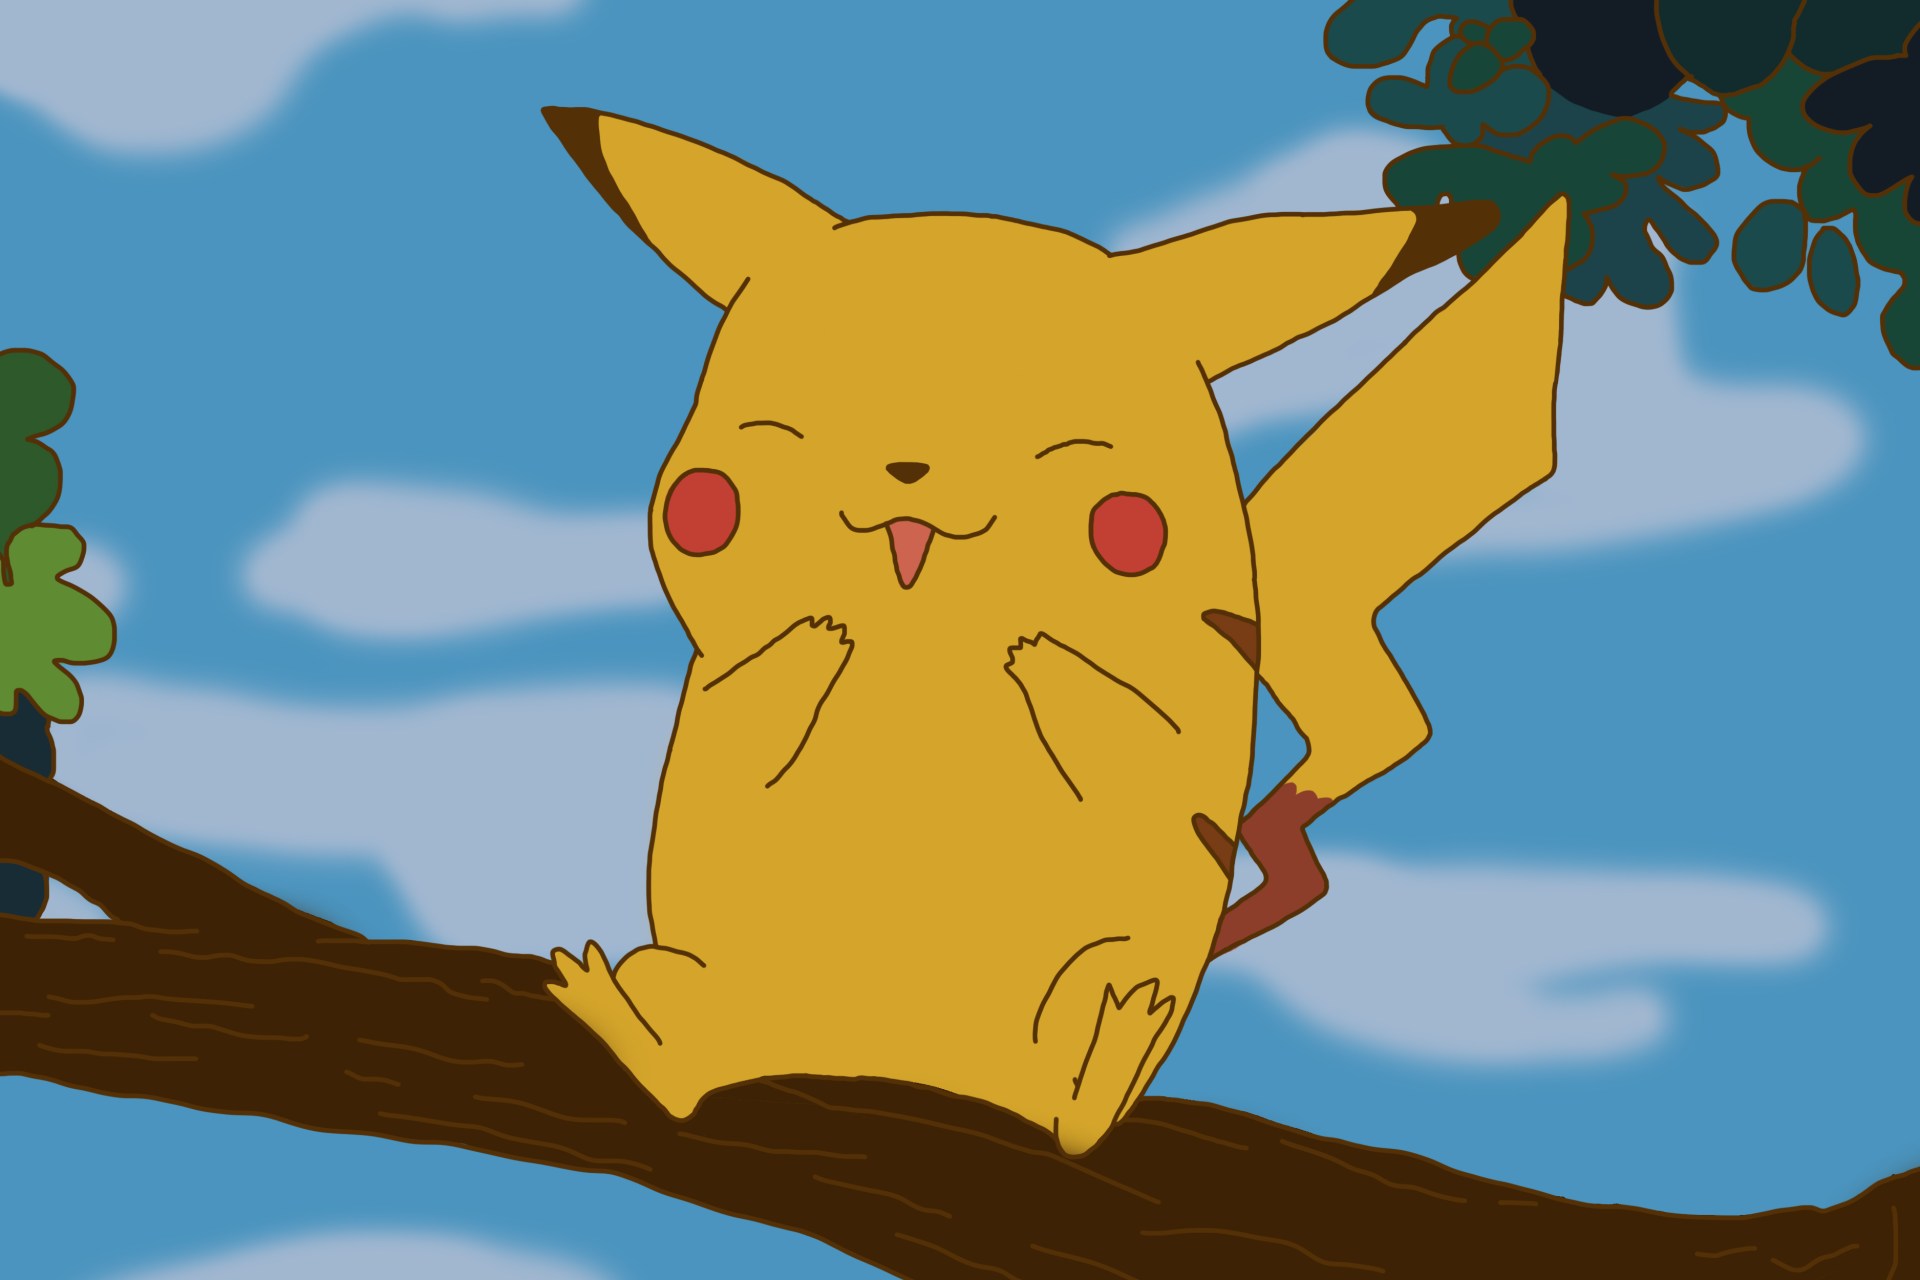 Fat Pokemon Girl Porn - 50 Pokemon Puns That Will Make You Laugh Your Ash Off | Thought Catalog